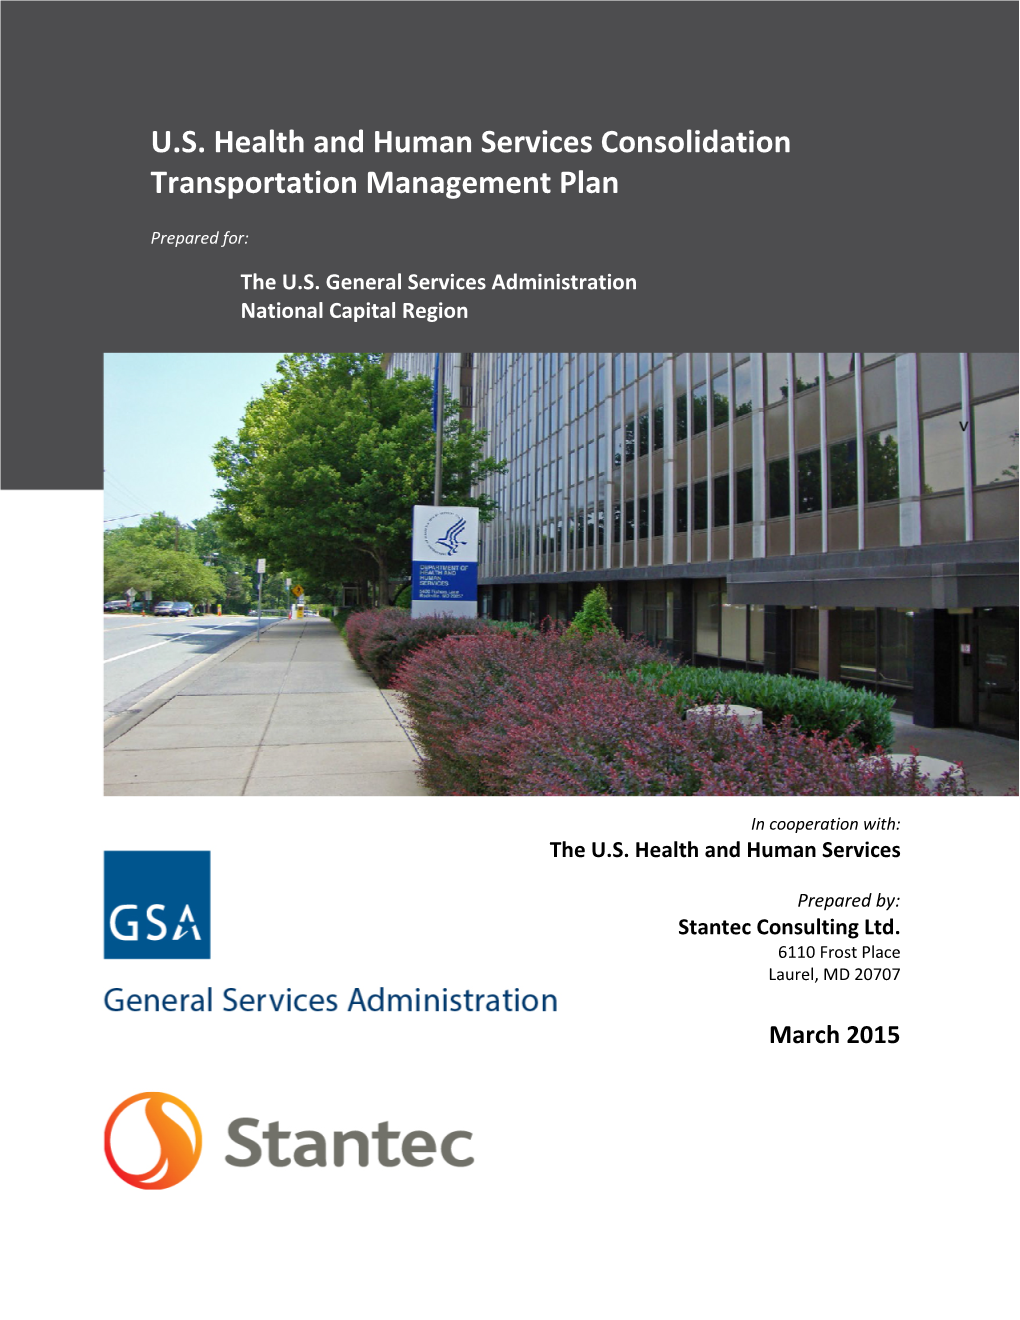 U.S. Health and Human Services Consolidation Transportation Management Plan